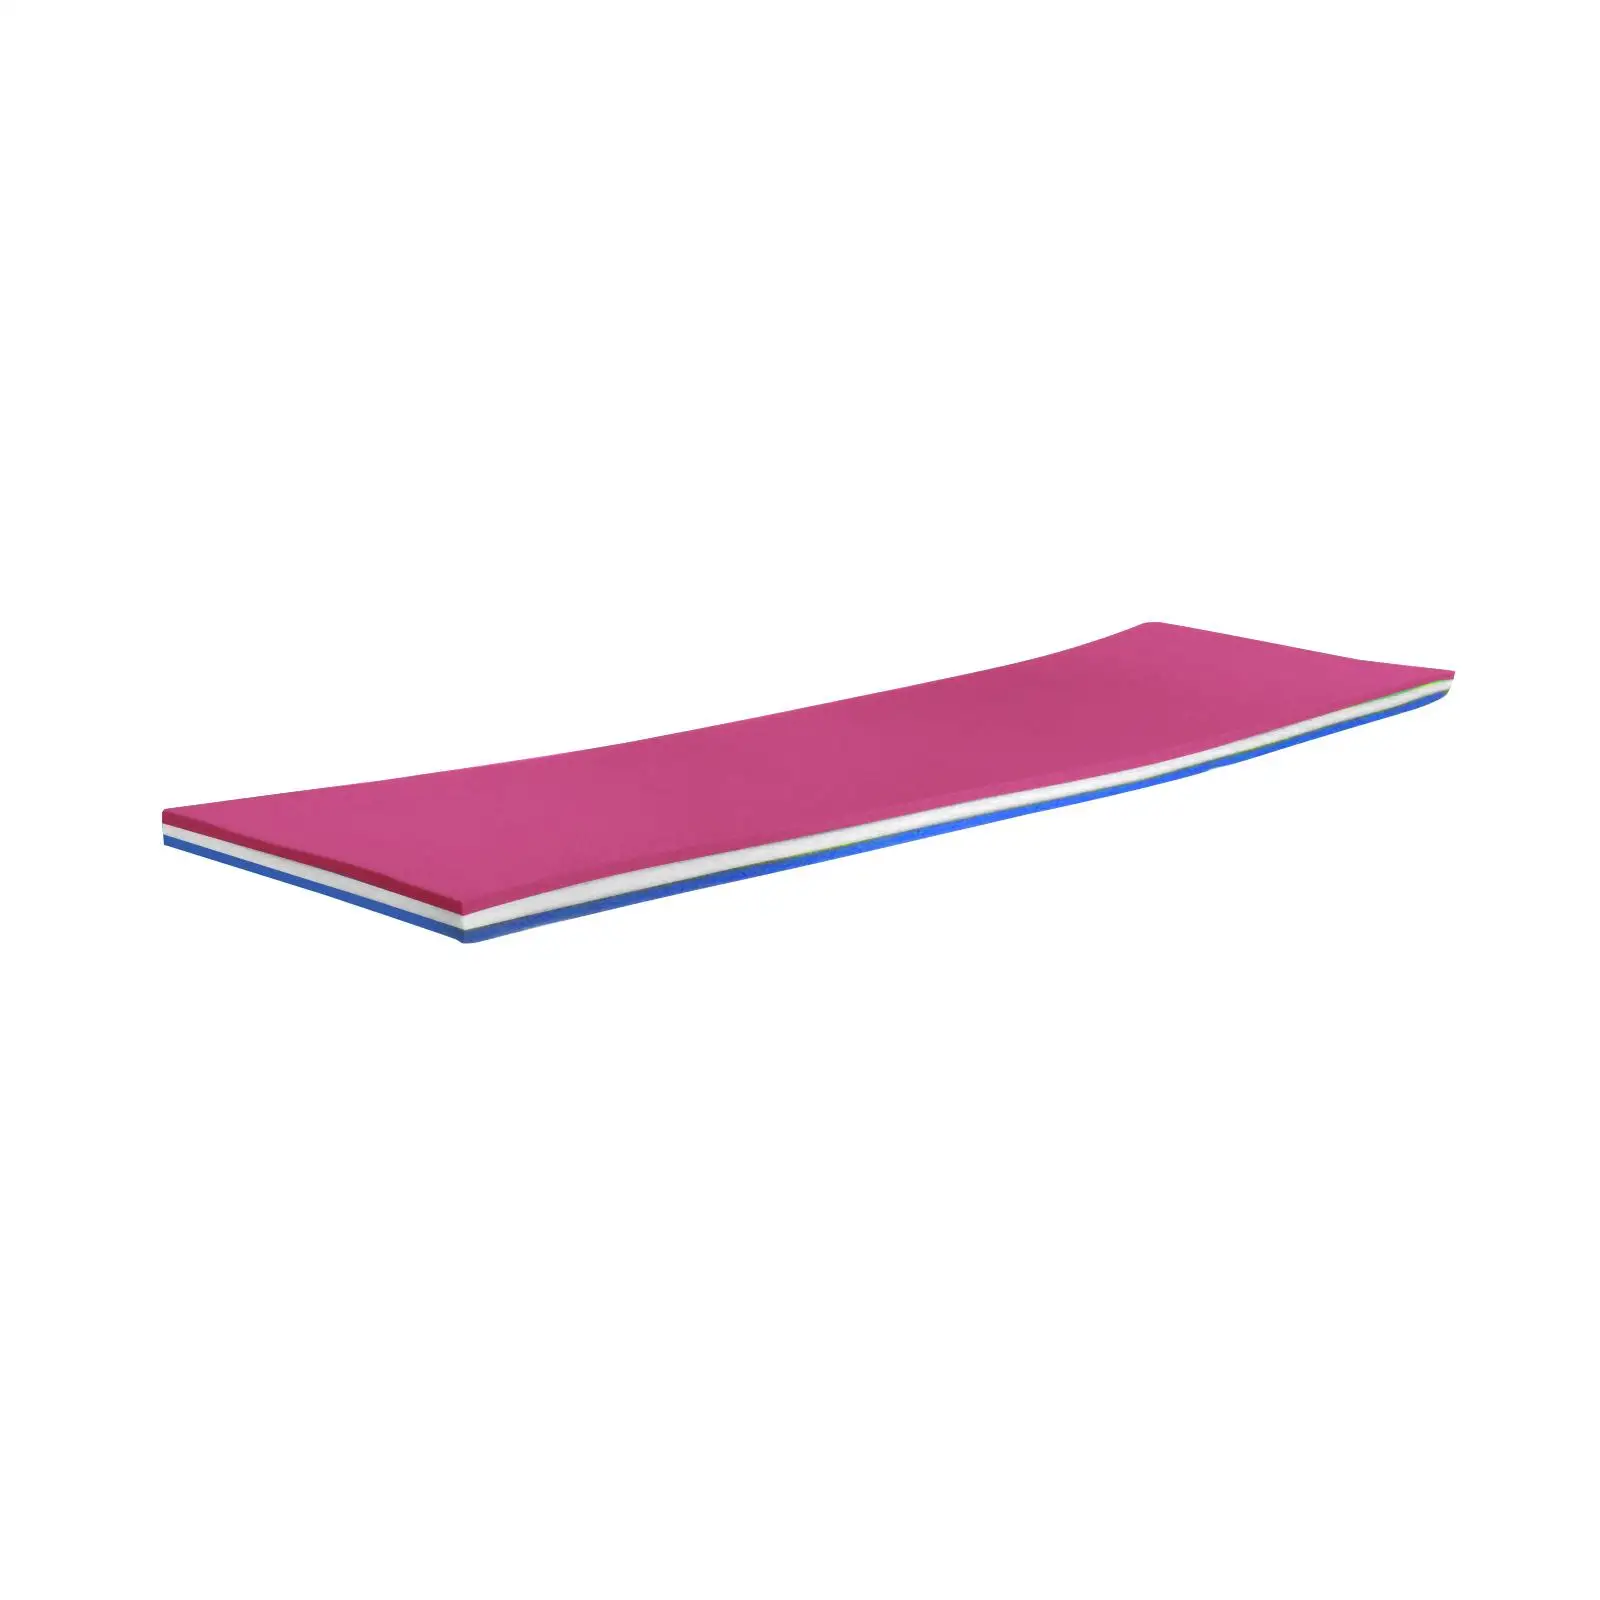 Pool Floating Water Mat 3 Layer Water Raft 43x15.7x1.3Inches for Playing, Relaxing, Recreation Roll up Pad Pink White Blue